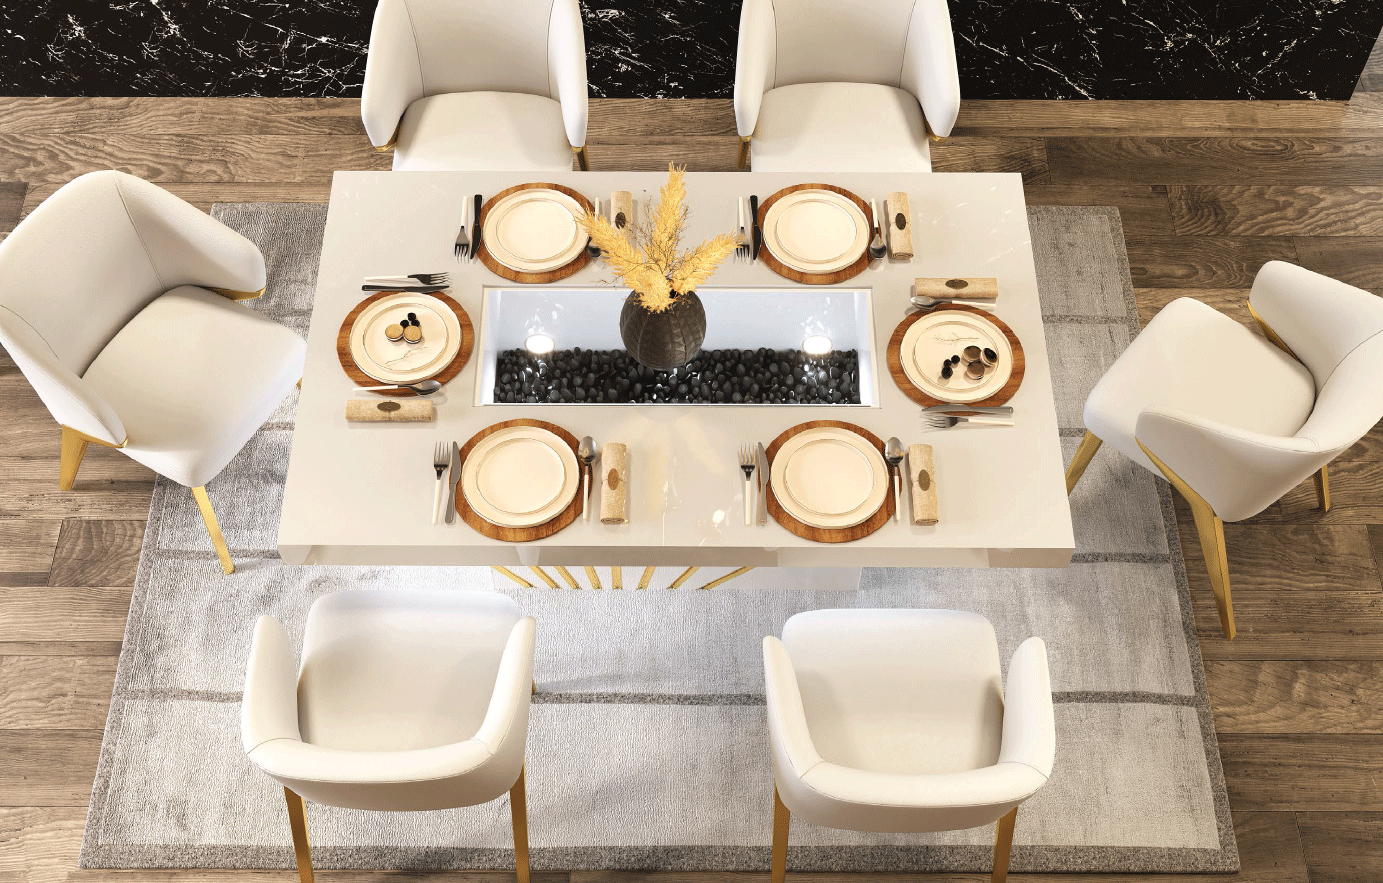 Brands Franco AZKARY II Chairs, SPAIN Oro White Dining room Additional Items